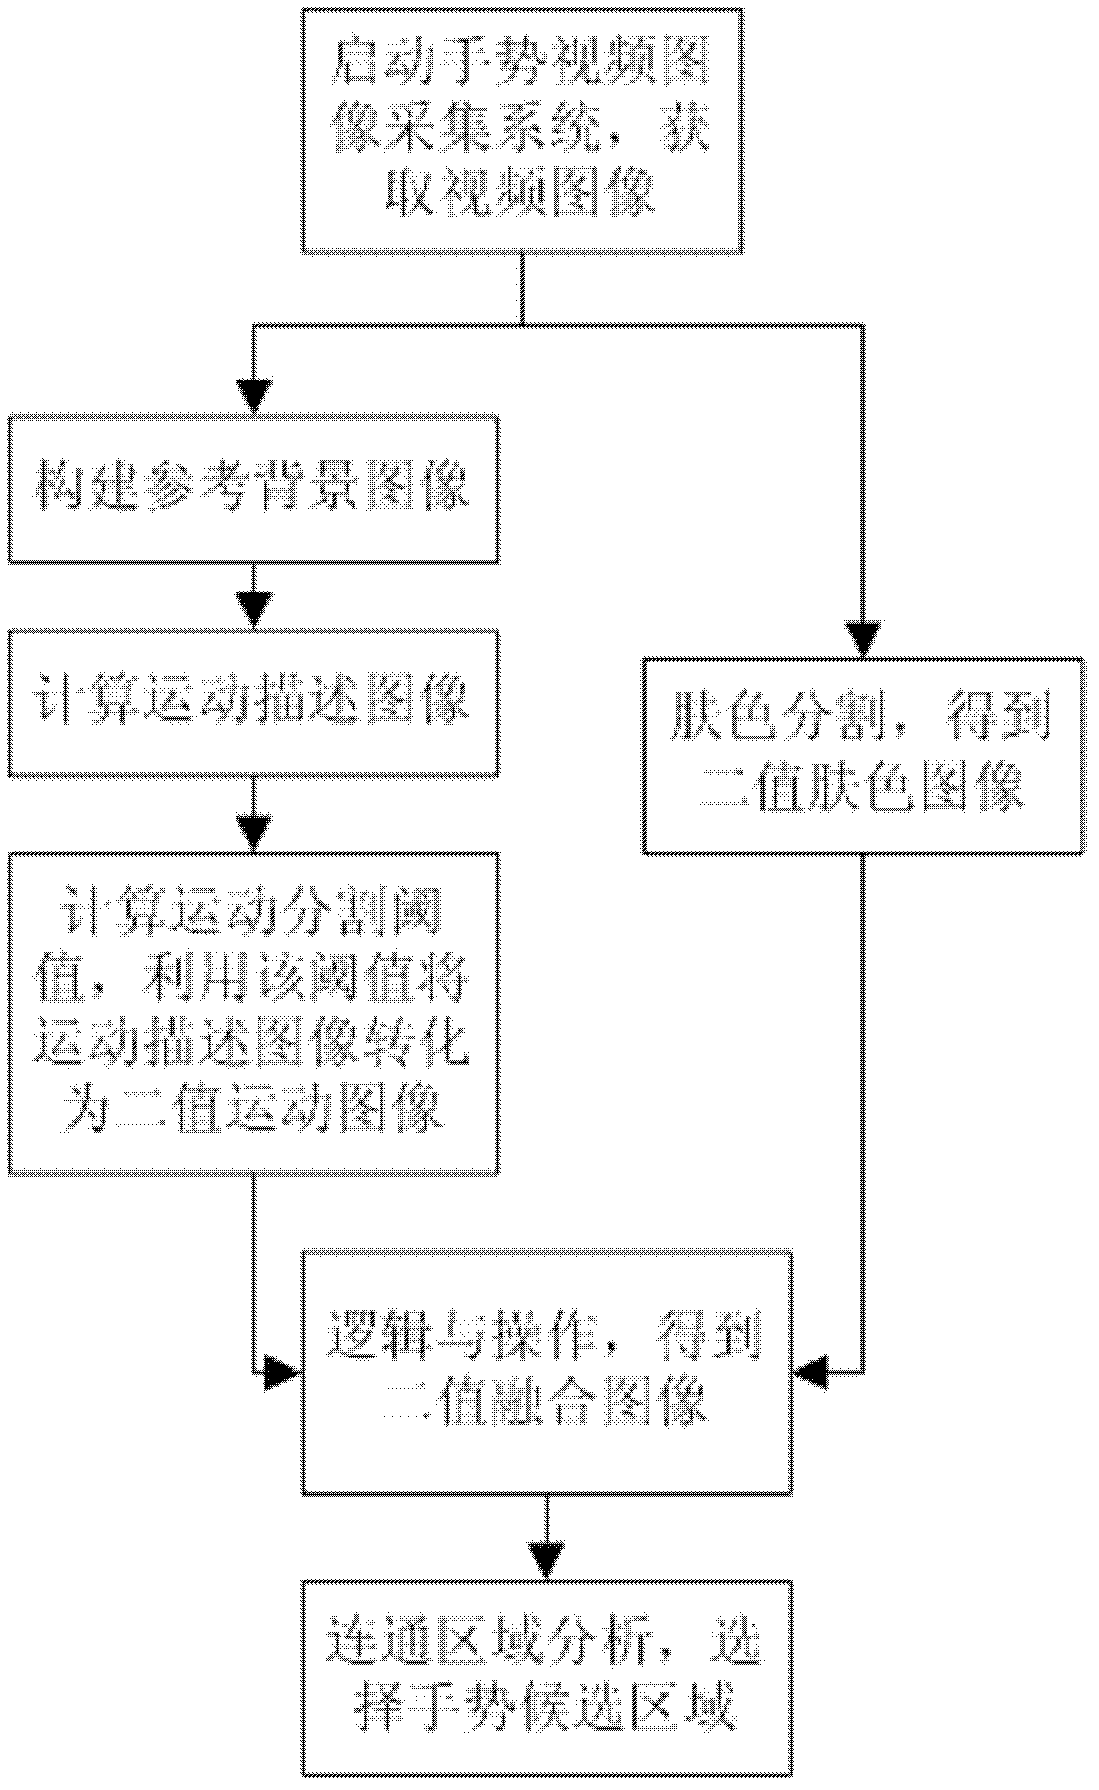 Method and system for automatically extracting gesture candidate region in video sequence